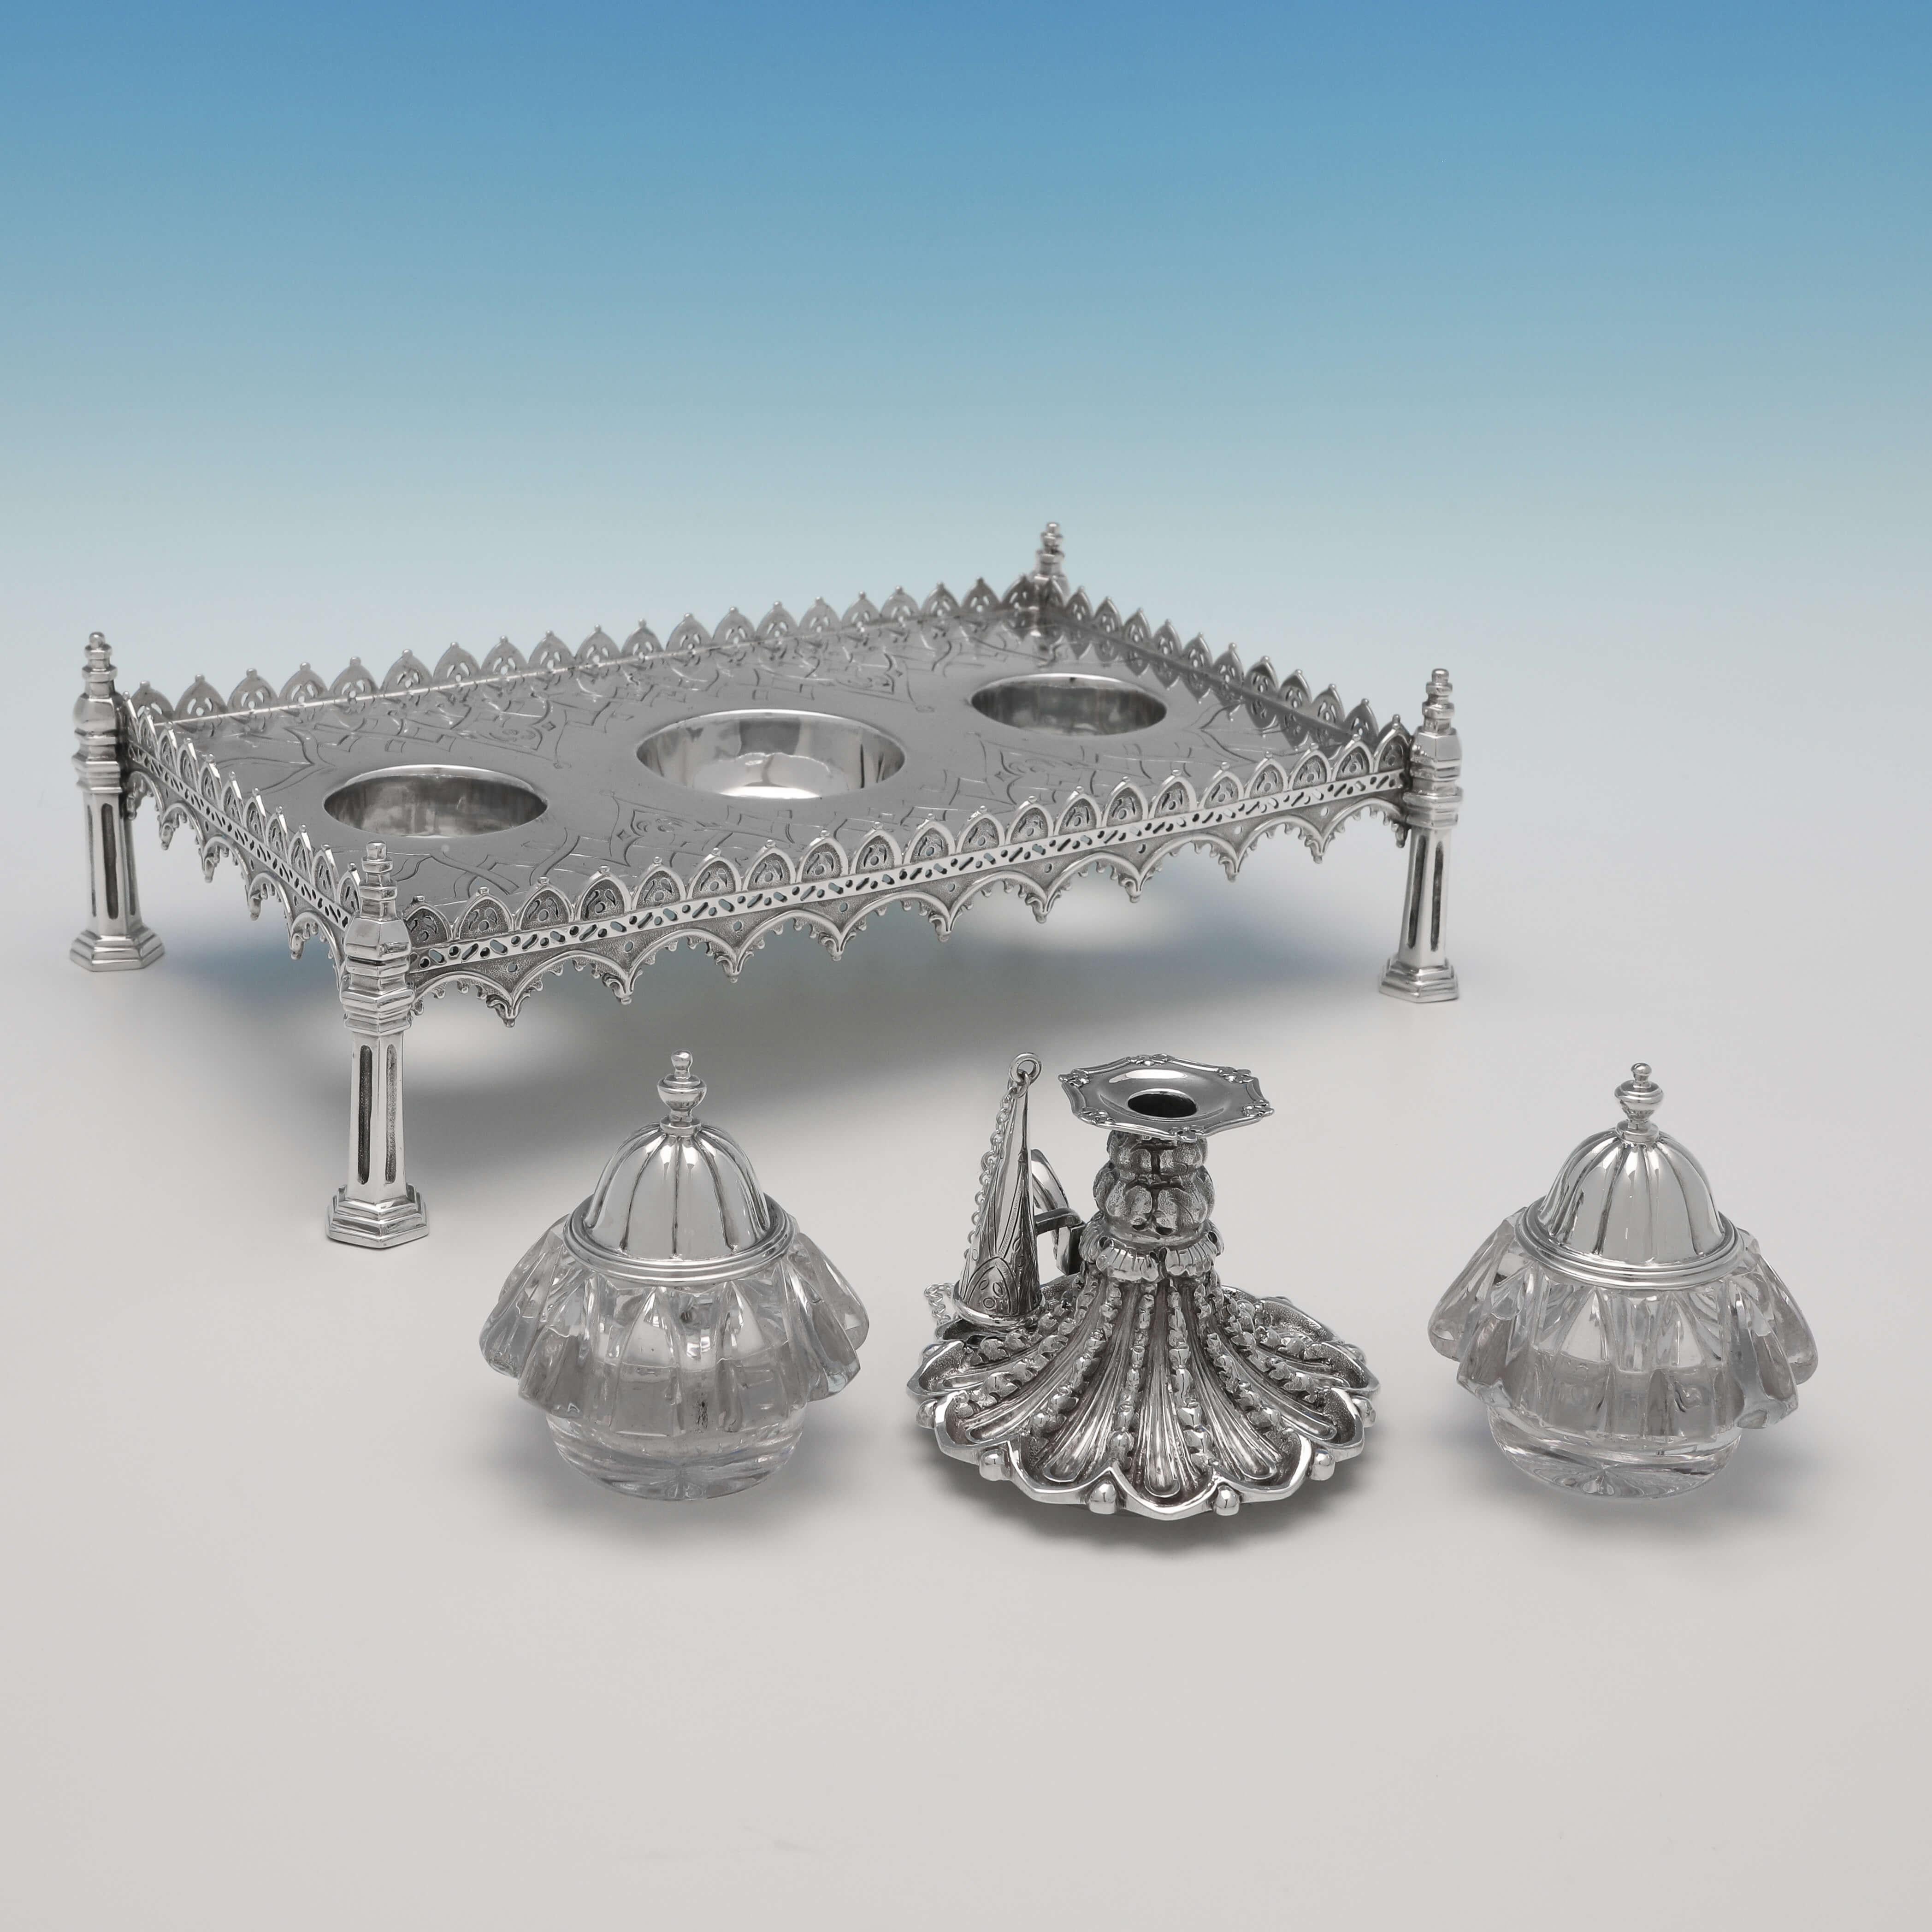 Gothic Revival Gothic Antique Sterling Silver Ink Stand by Joseph Angell & Son, London, 1893